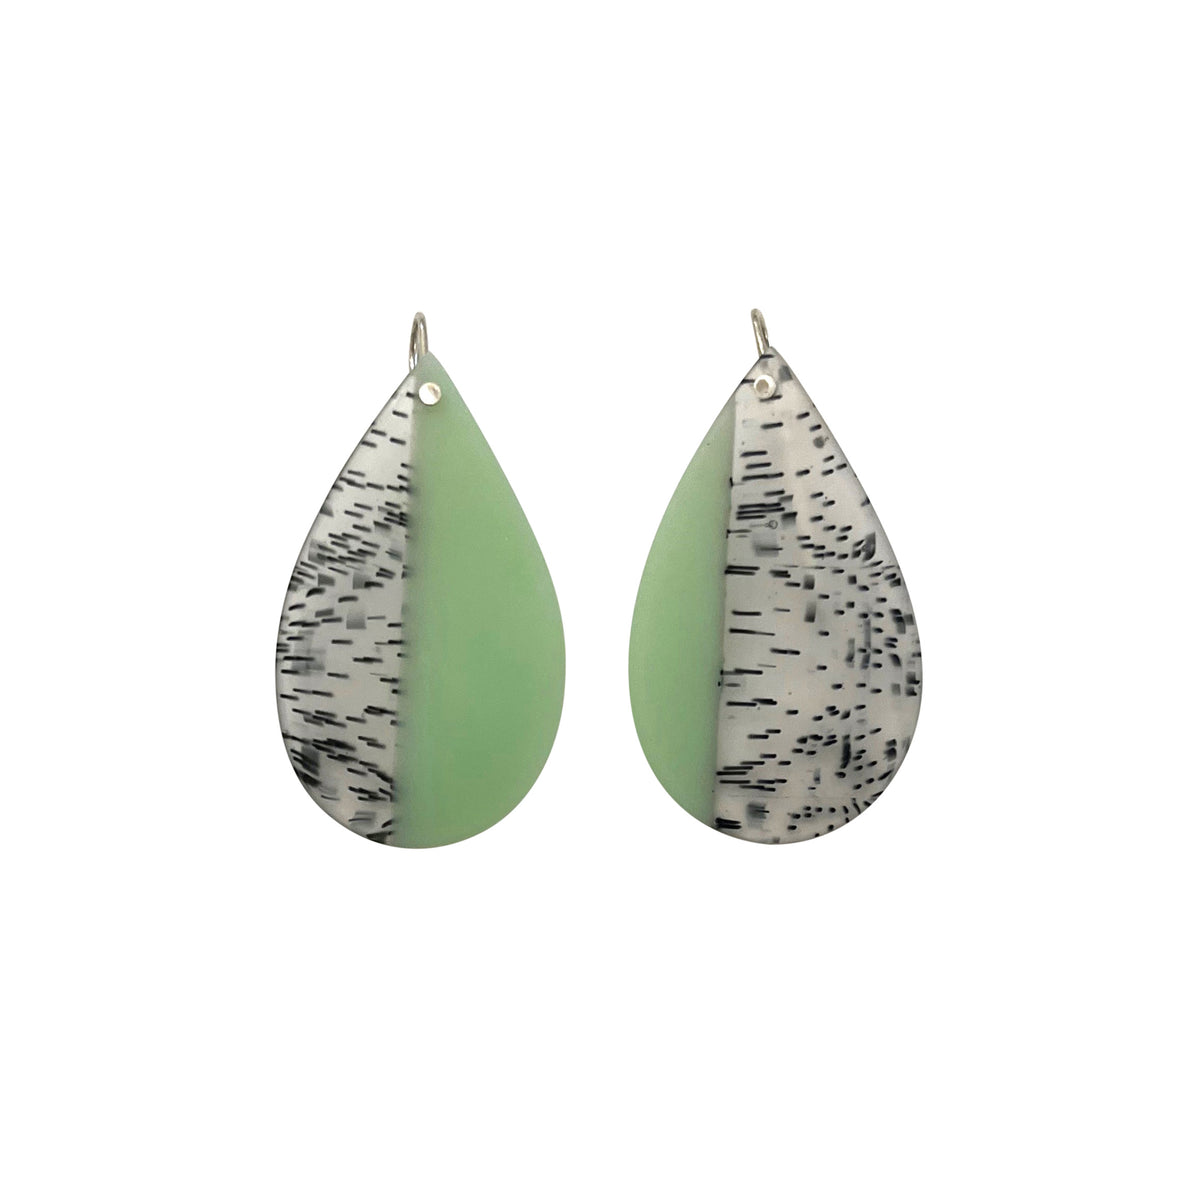 CARVED 1 PIECE DAMGLE EARRINGS - GREEN AND BLACK